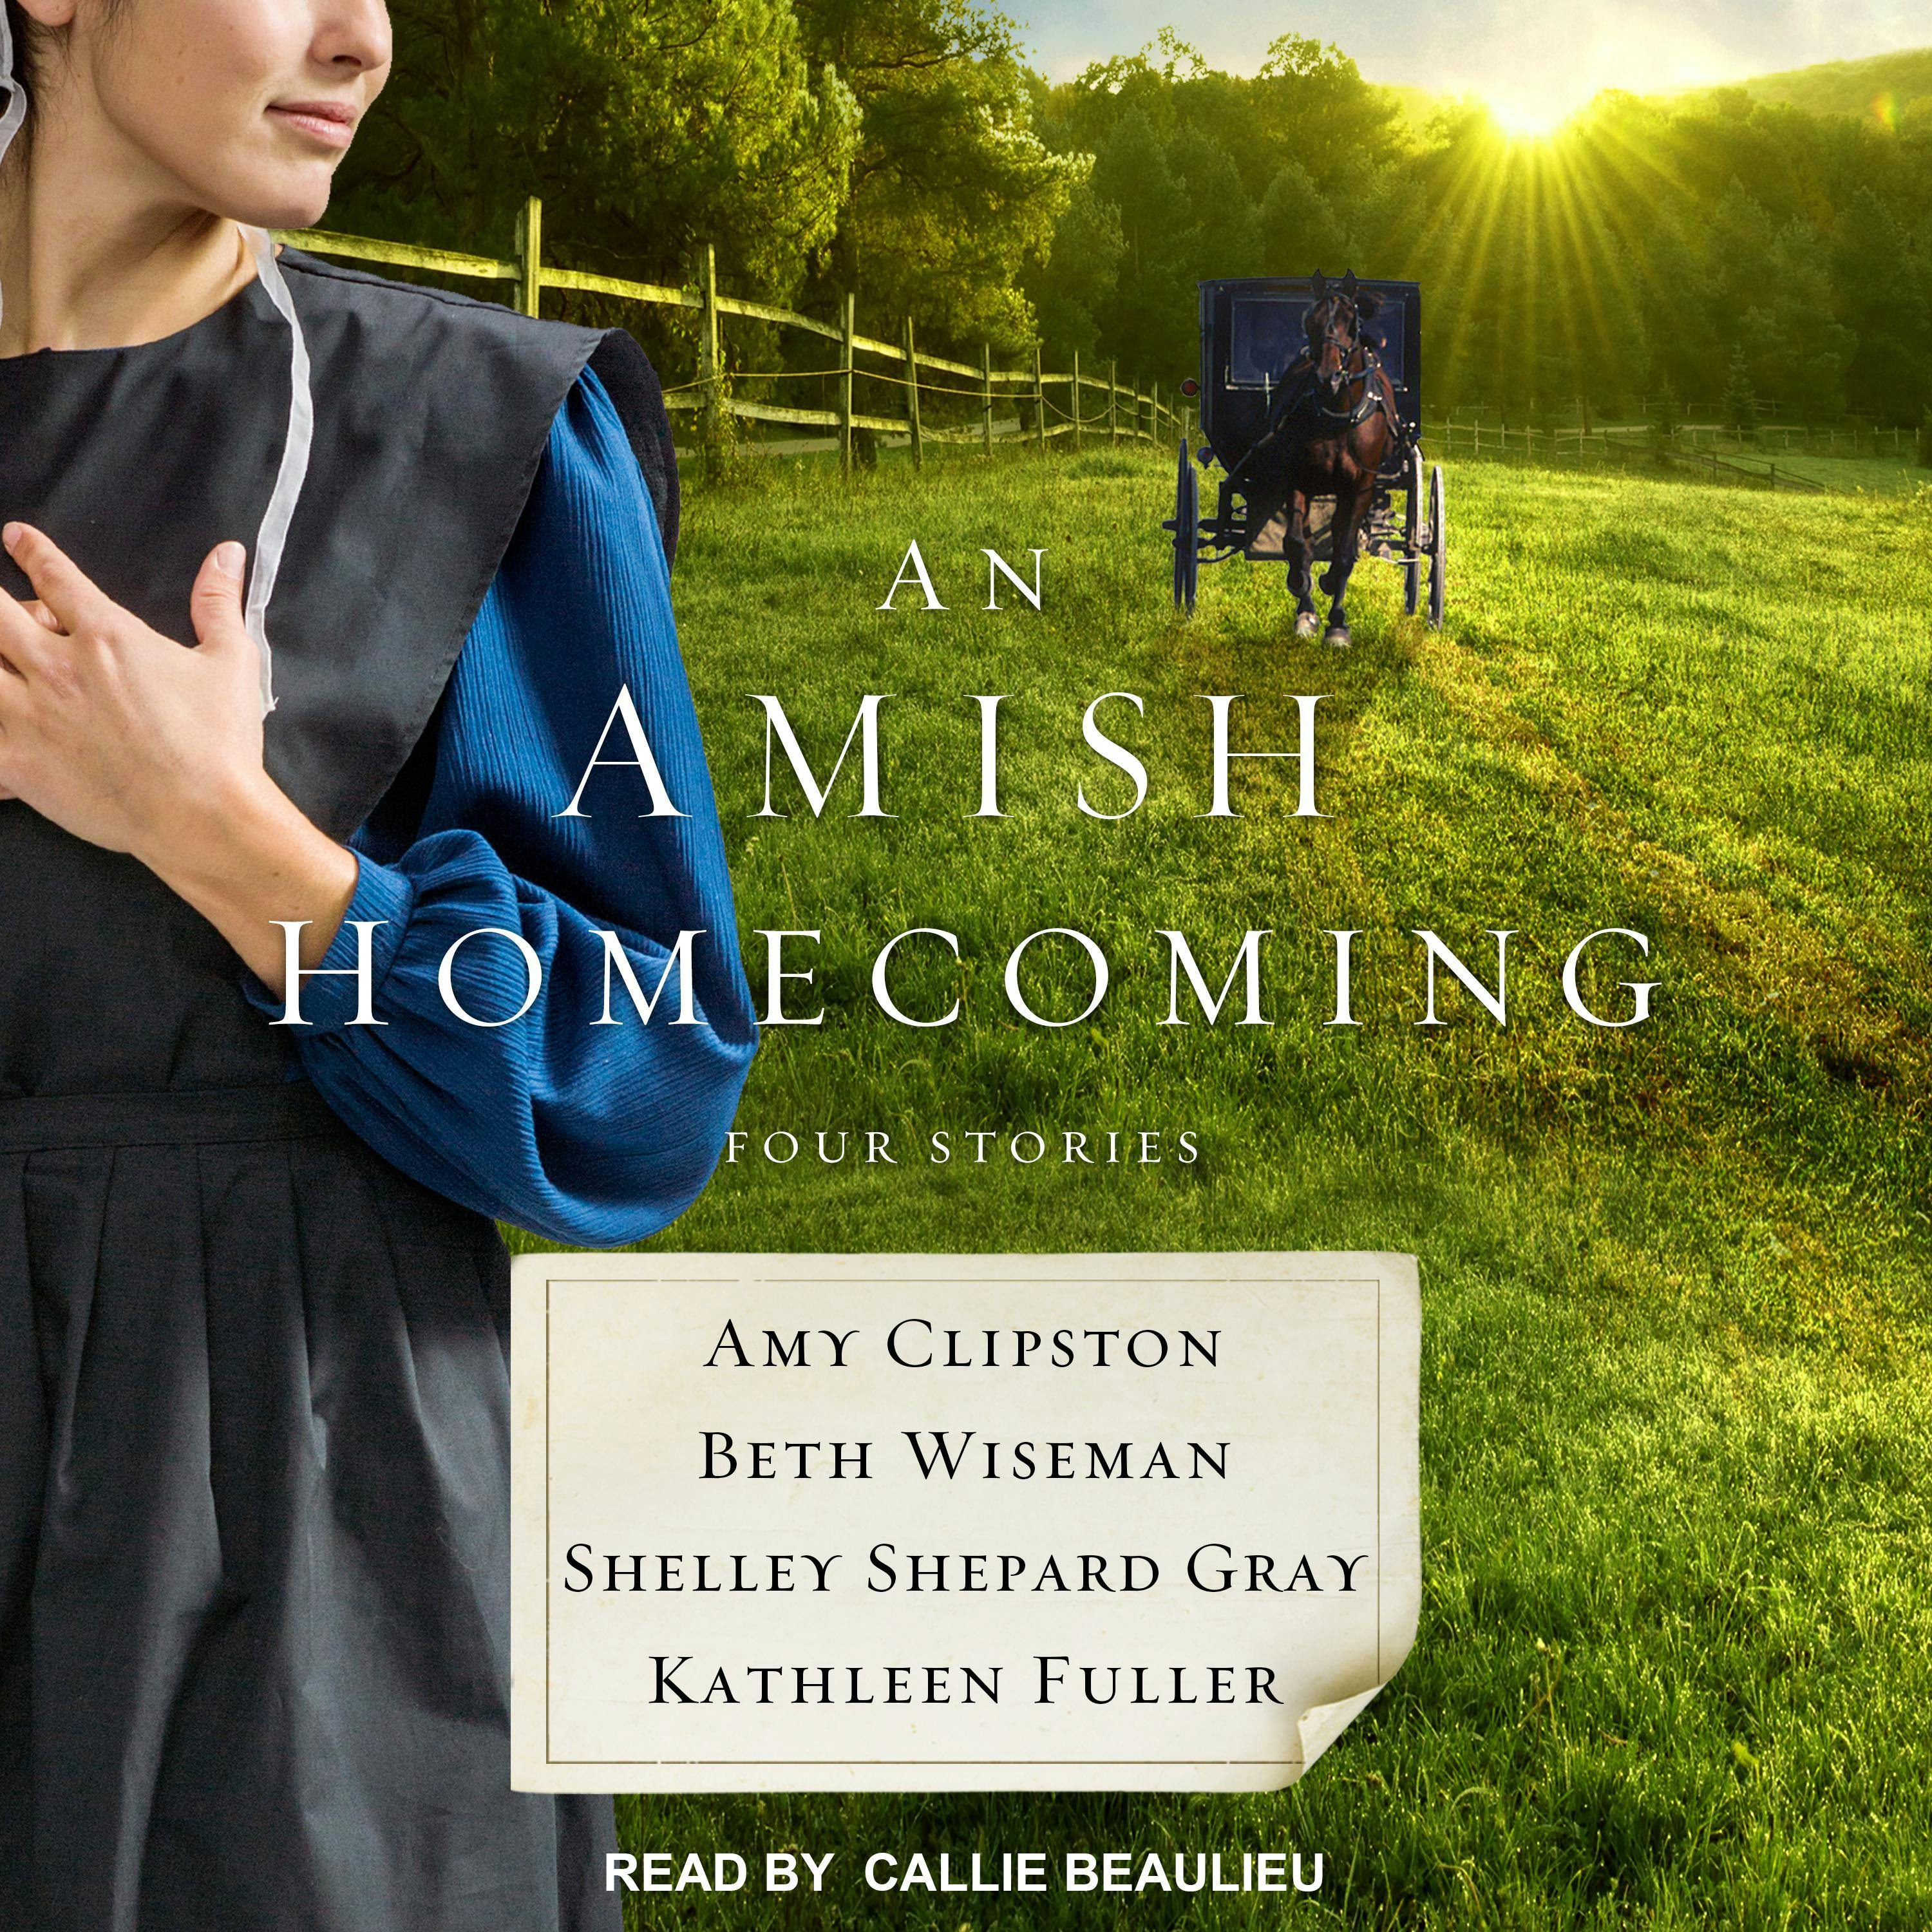 An Amish Homecoming: Four Stories - Shelley Shepard Gray, Beth Wiseman, Amy Clipston, Kathleen Fuller